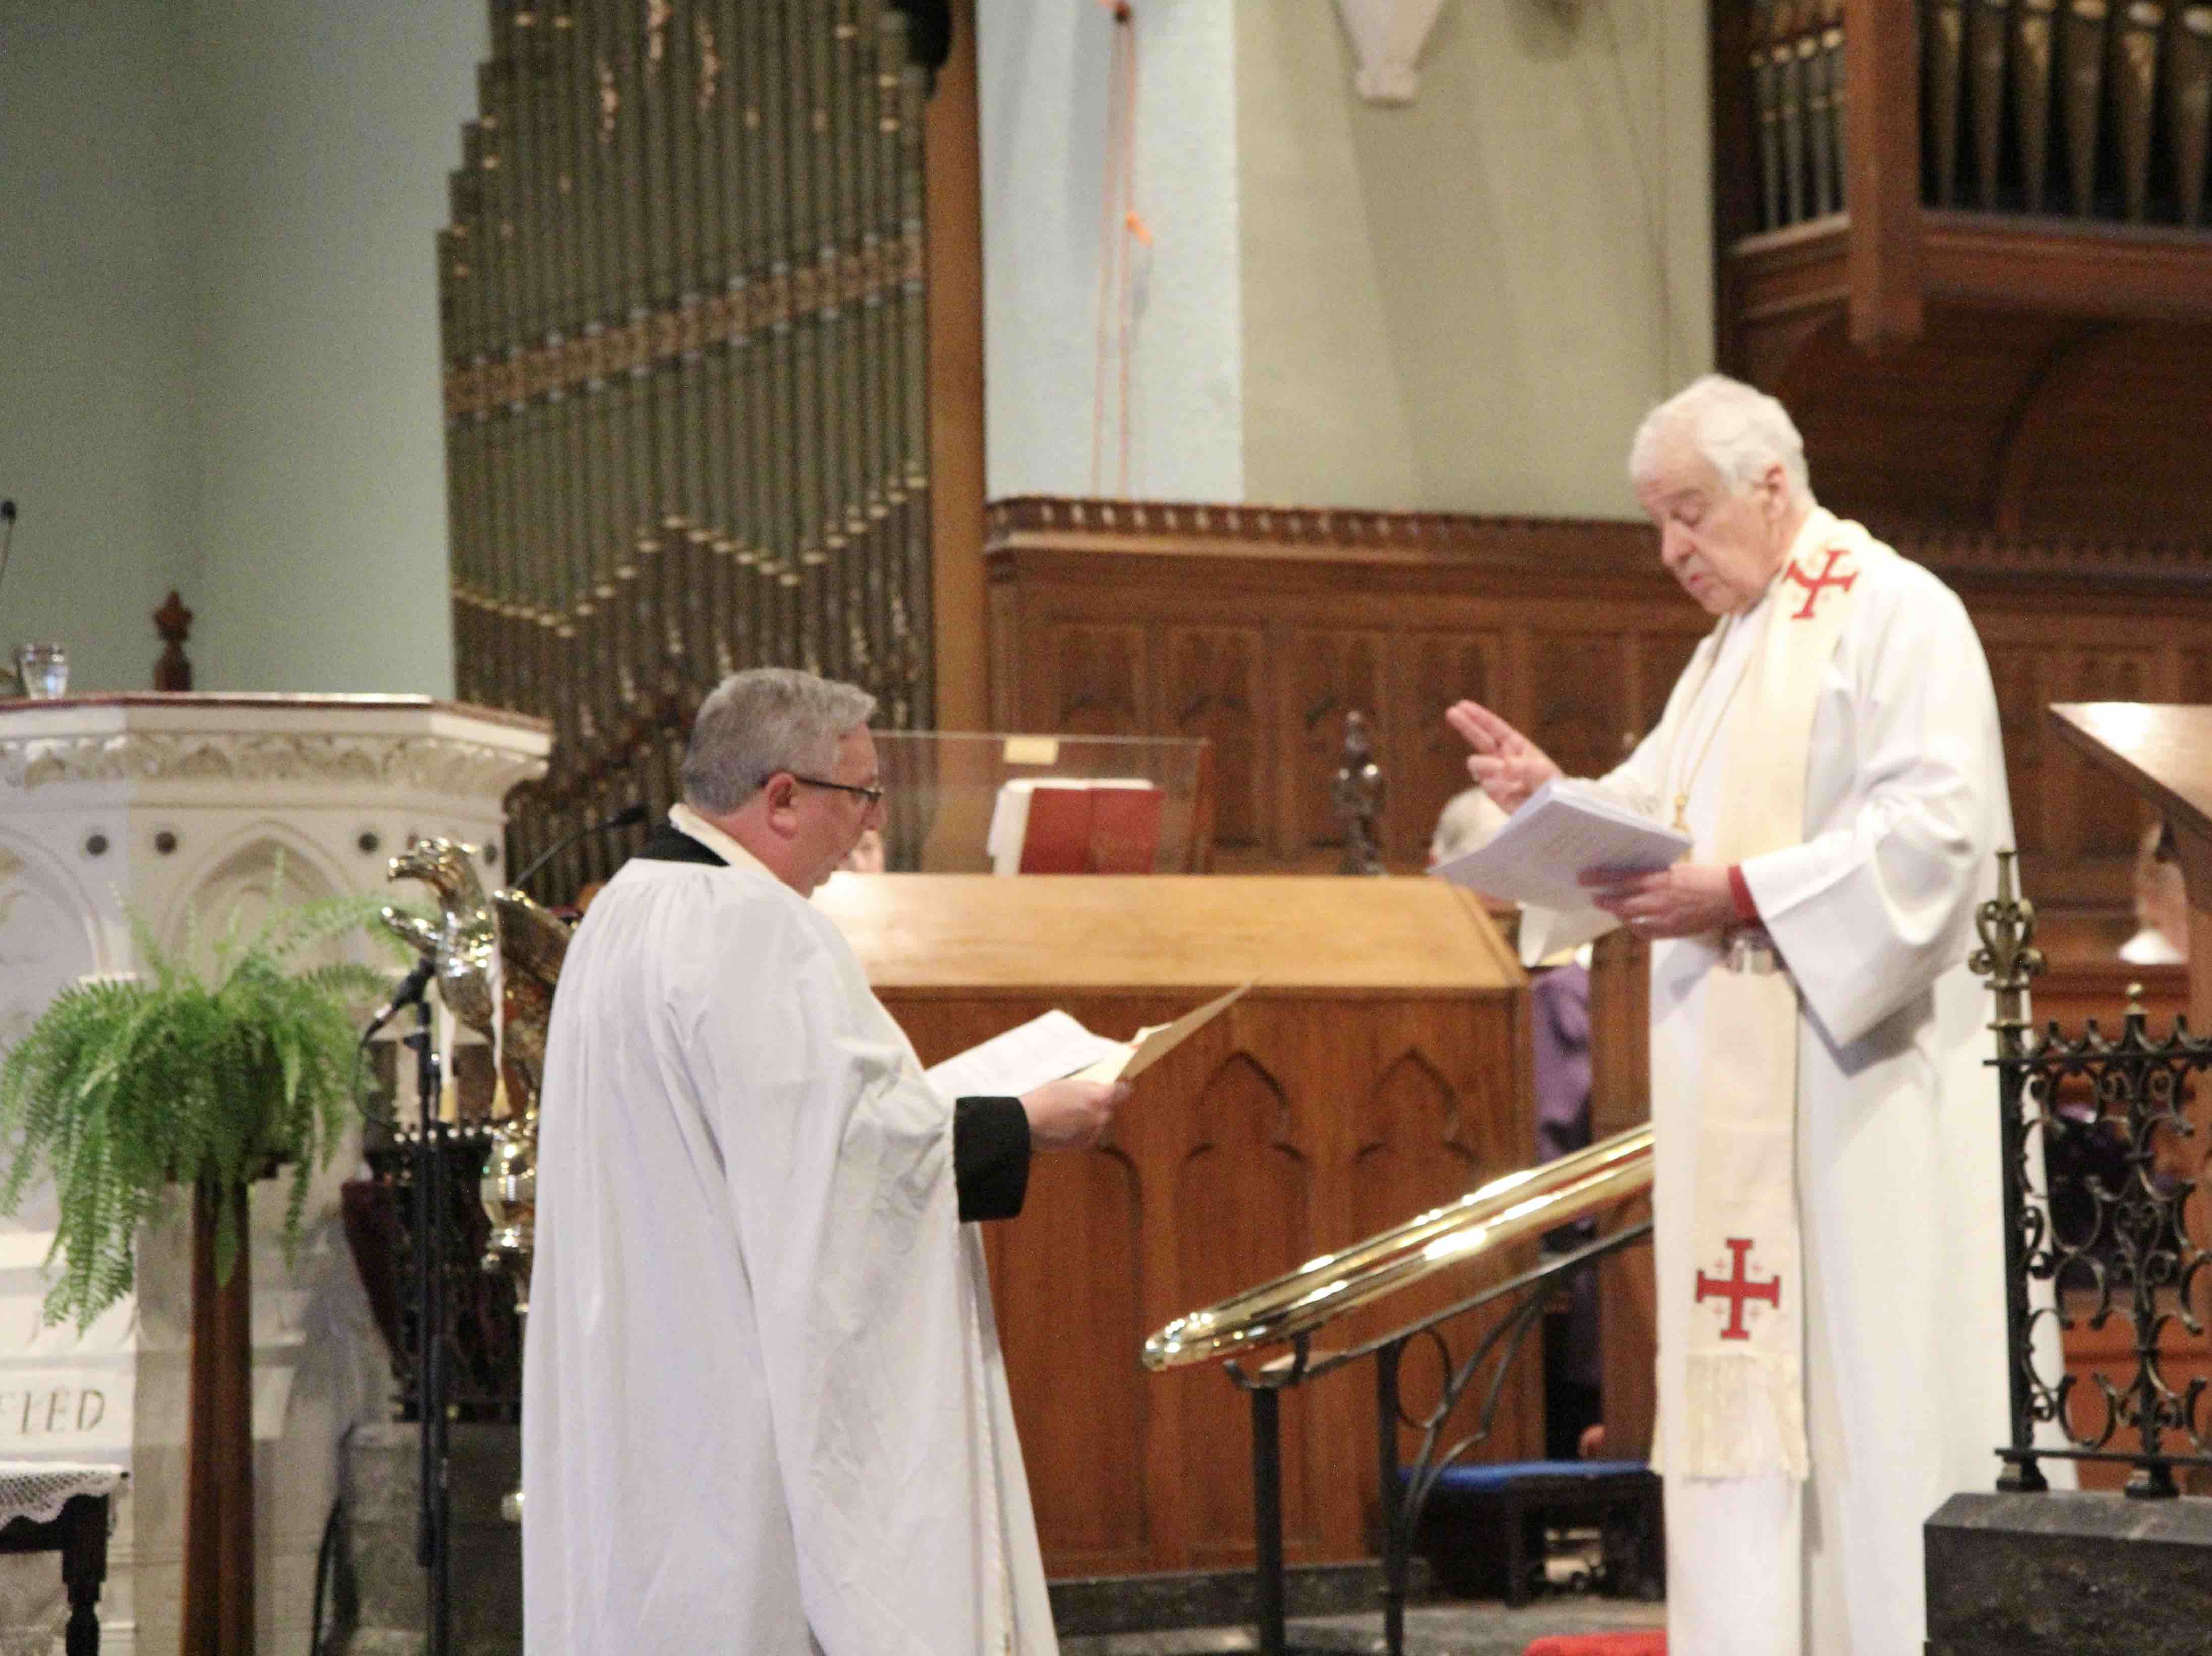 The Introduction of the Revd Steve Brunn by Archbishop Michael Jackson.